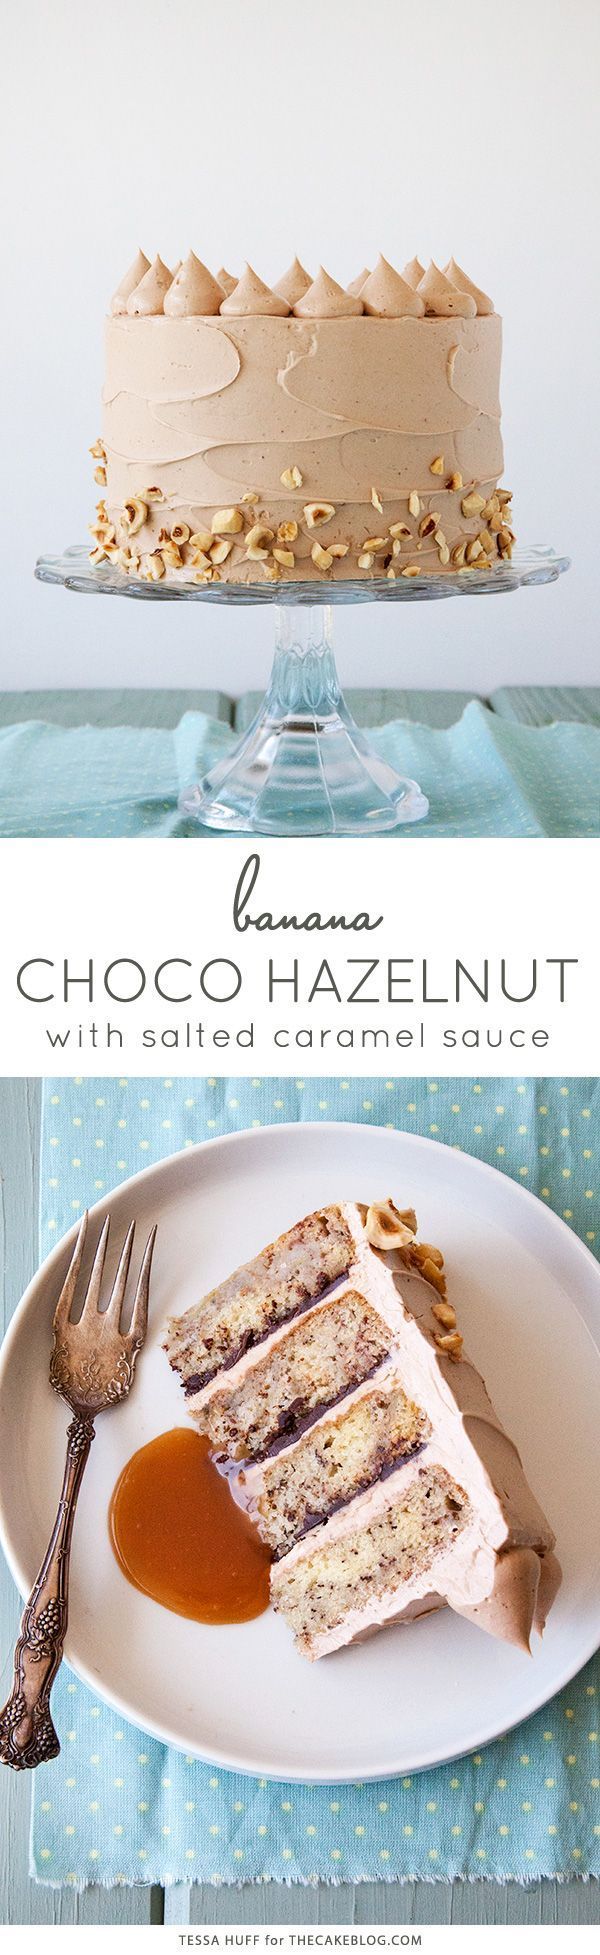 Banana Chocolate Hazelnut Cake with Salted Caramel Sauce. Or, in other words, all of my favorite flavors i